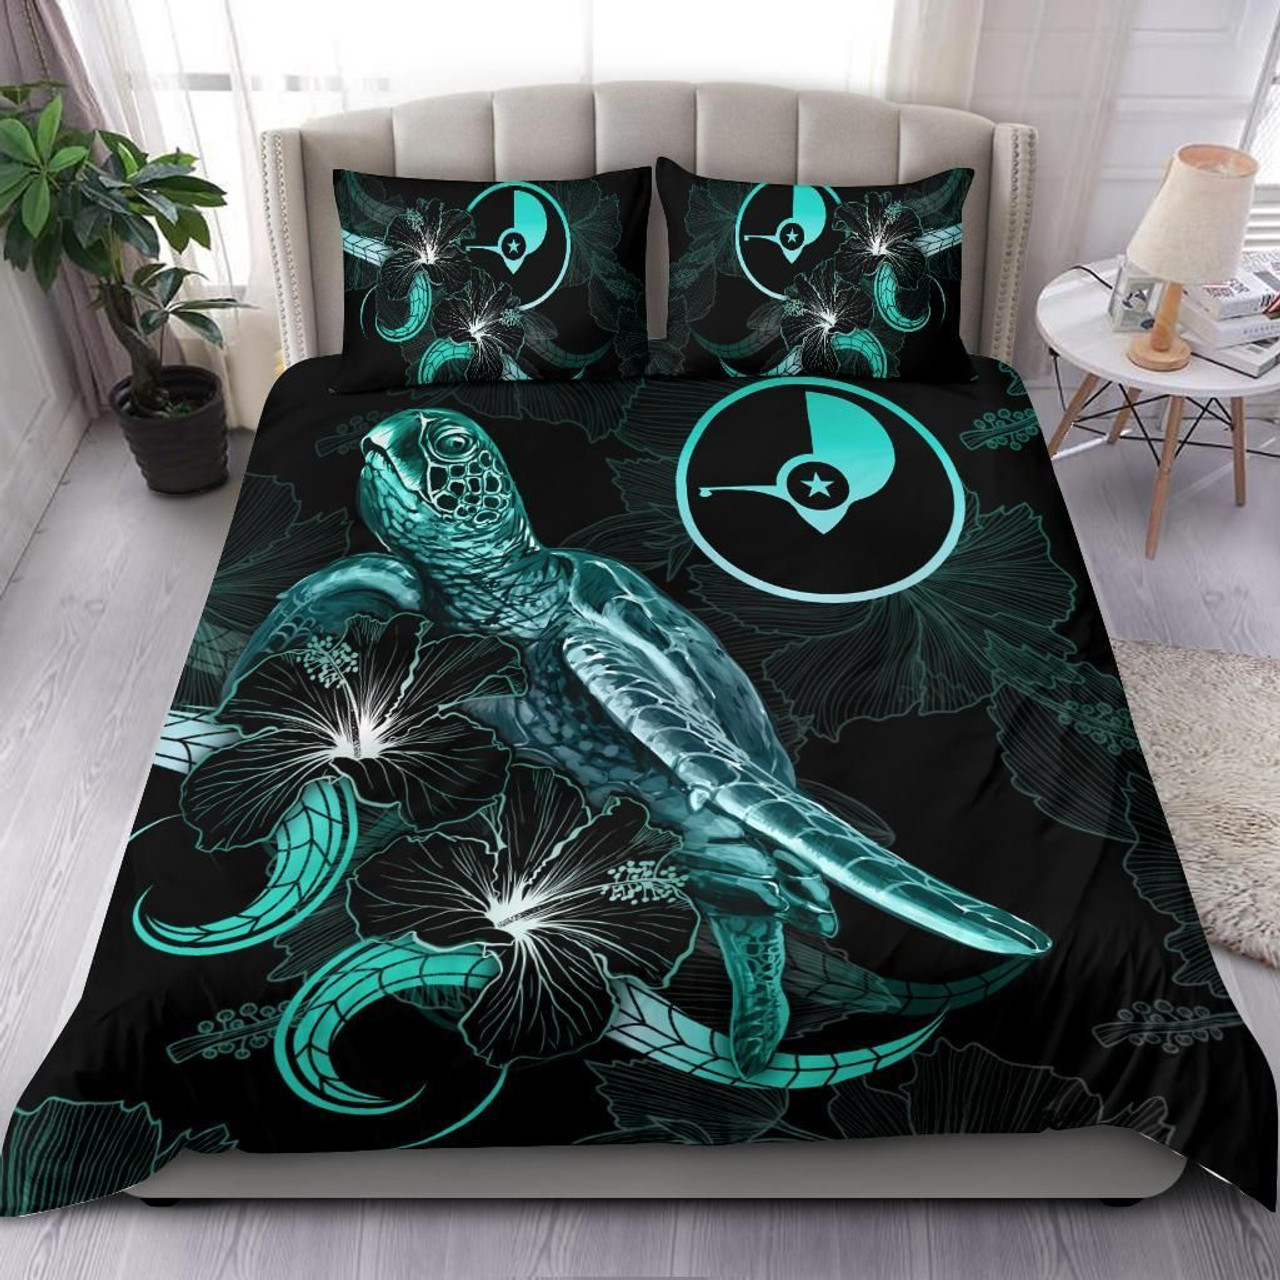 Yap Polynesian Bedding Set - Turtle With Blooming Hibiscus Turquoise 1